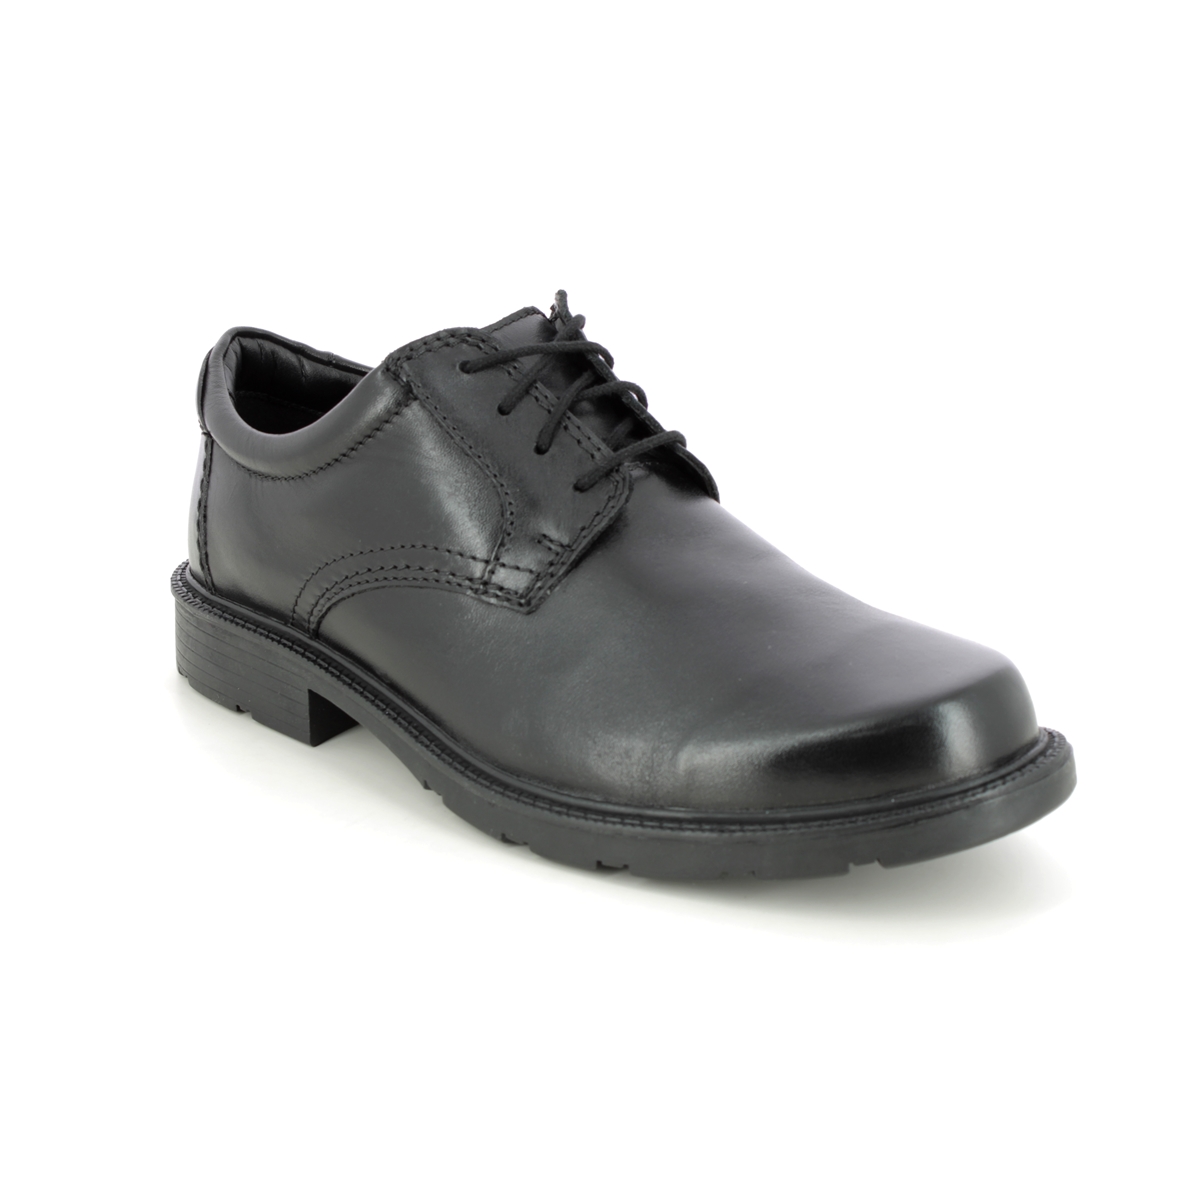 Clarks Kerton Lace Black leather Mens formal shoes 6560-57G in a Plain Leather in Size 7.5